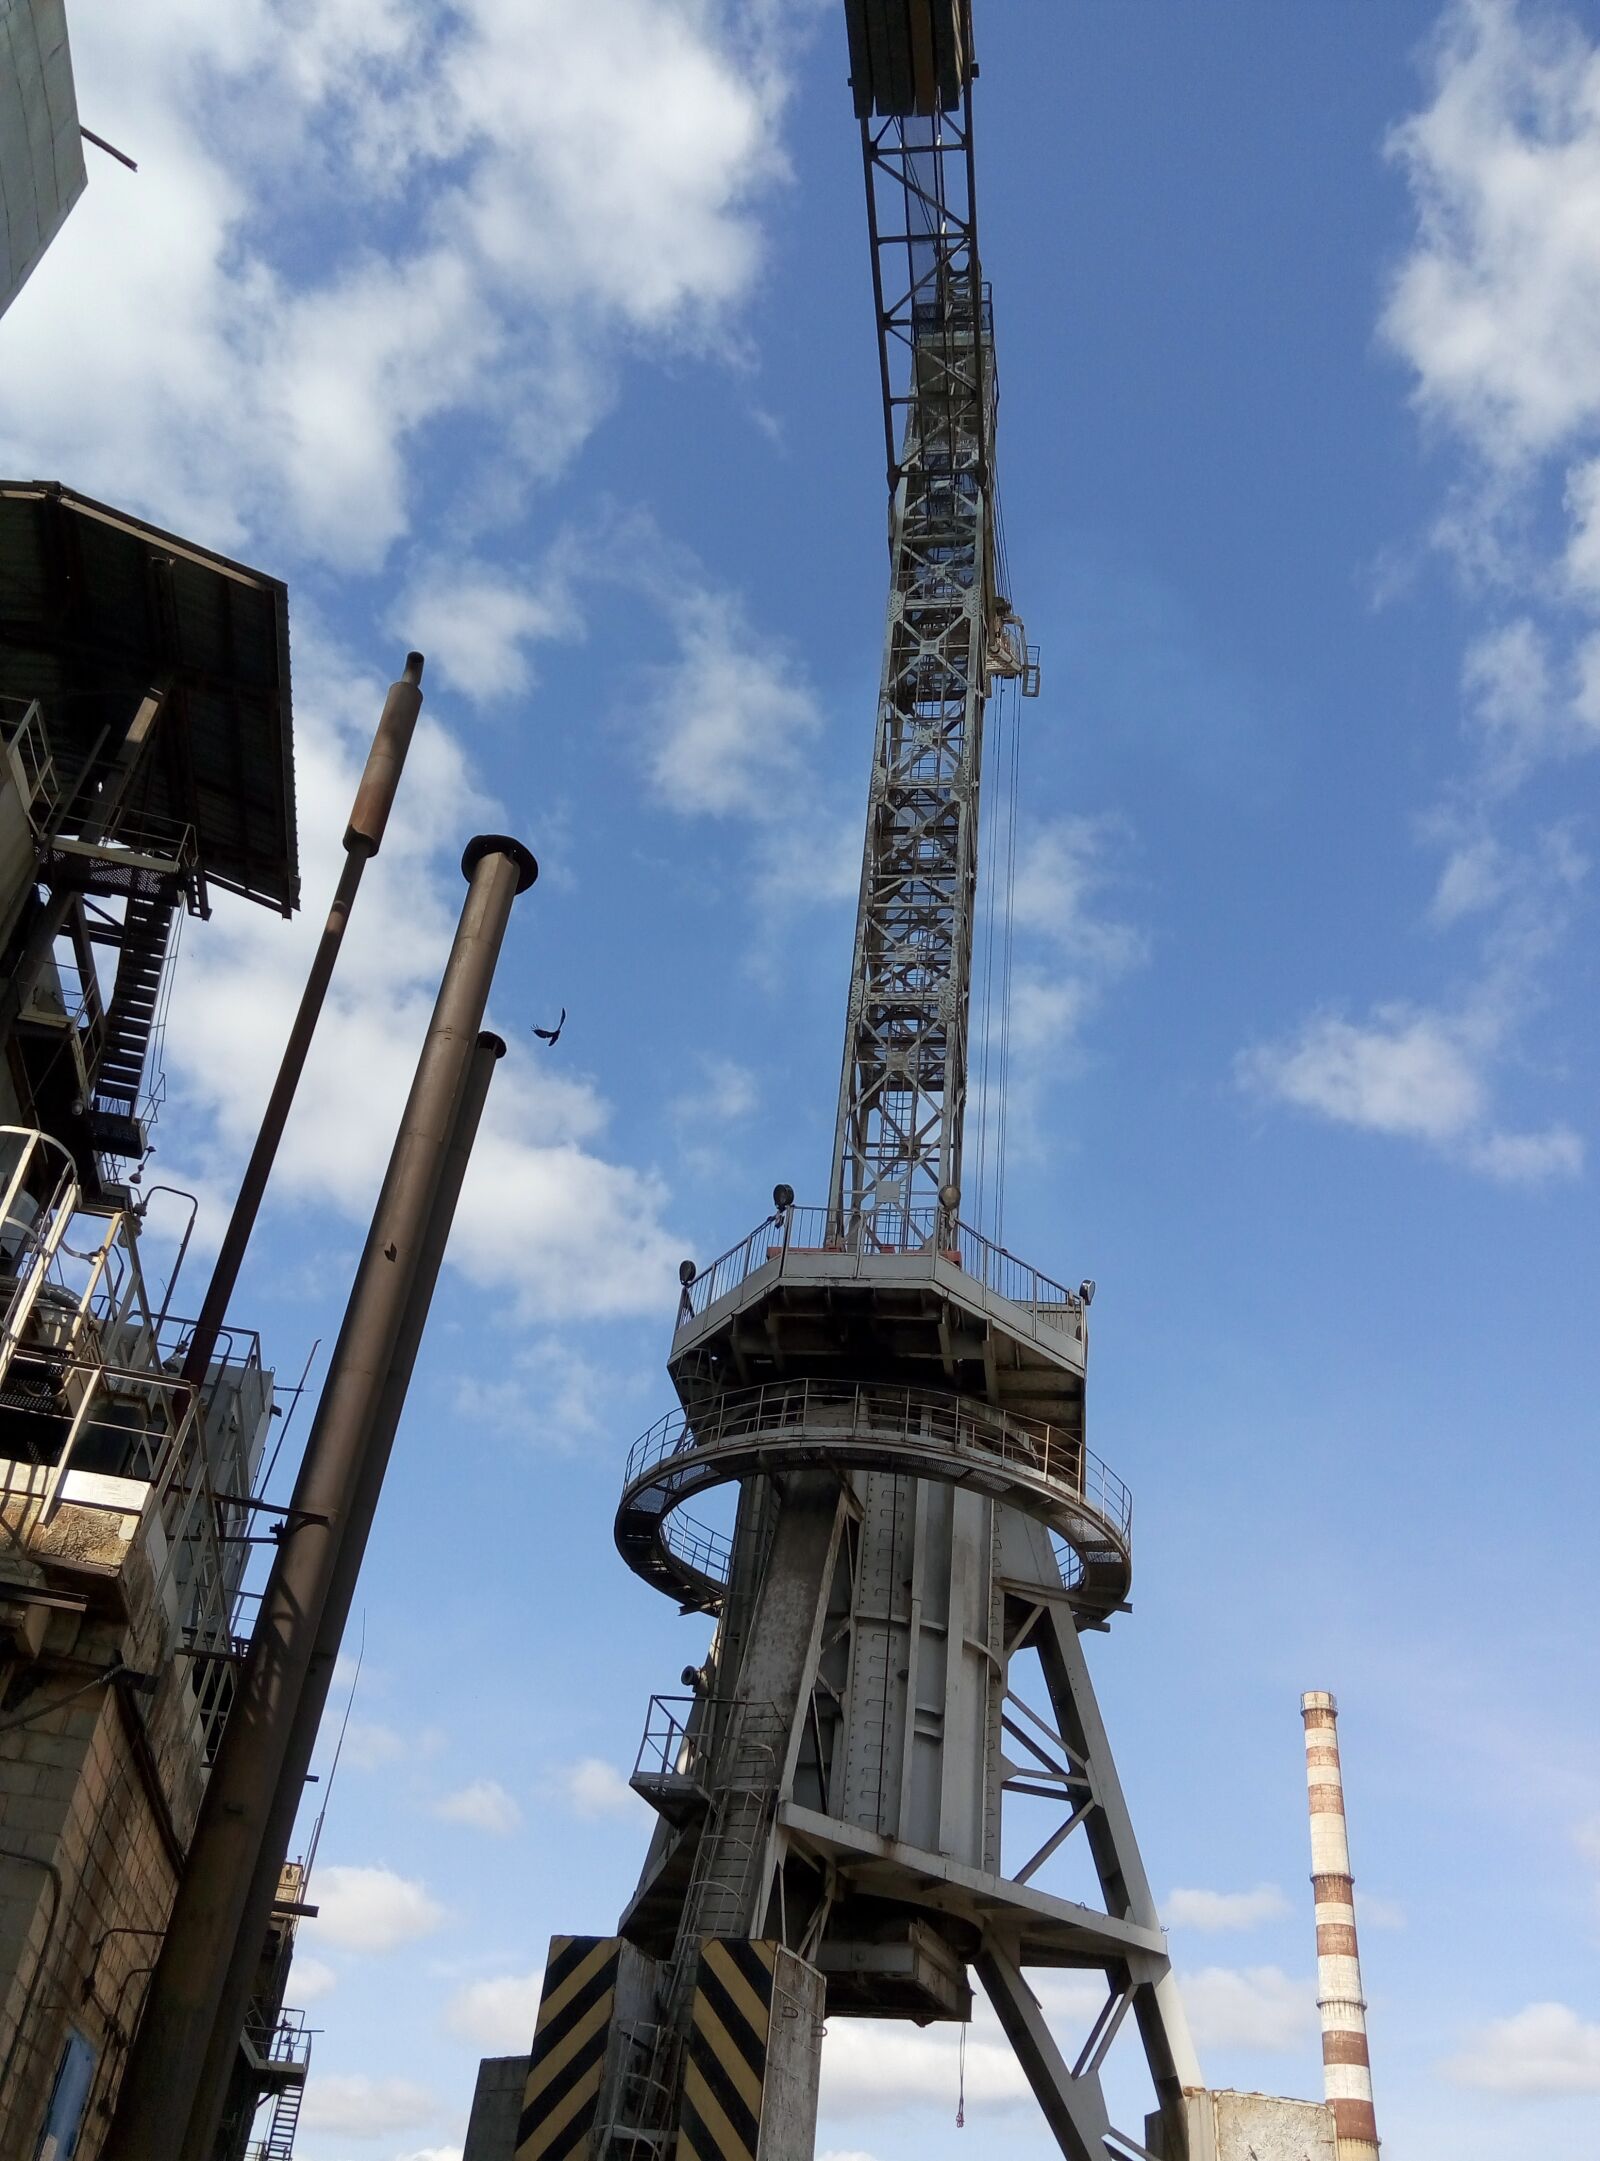 Meizu m2 note sample photo. Tower crane, factory, industrial photography